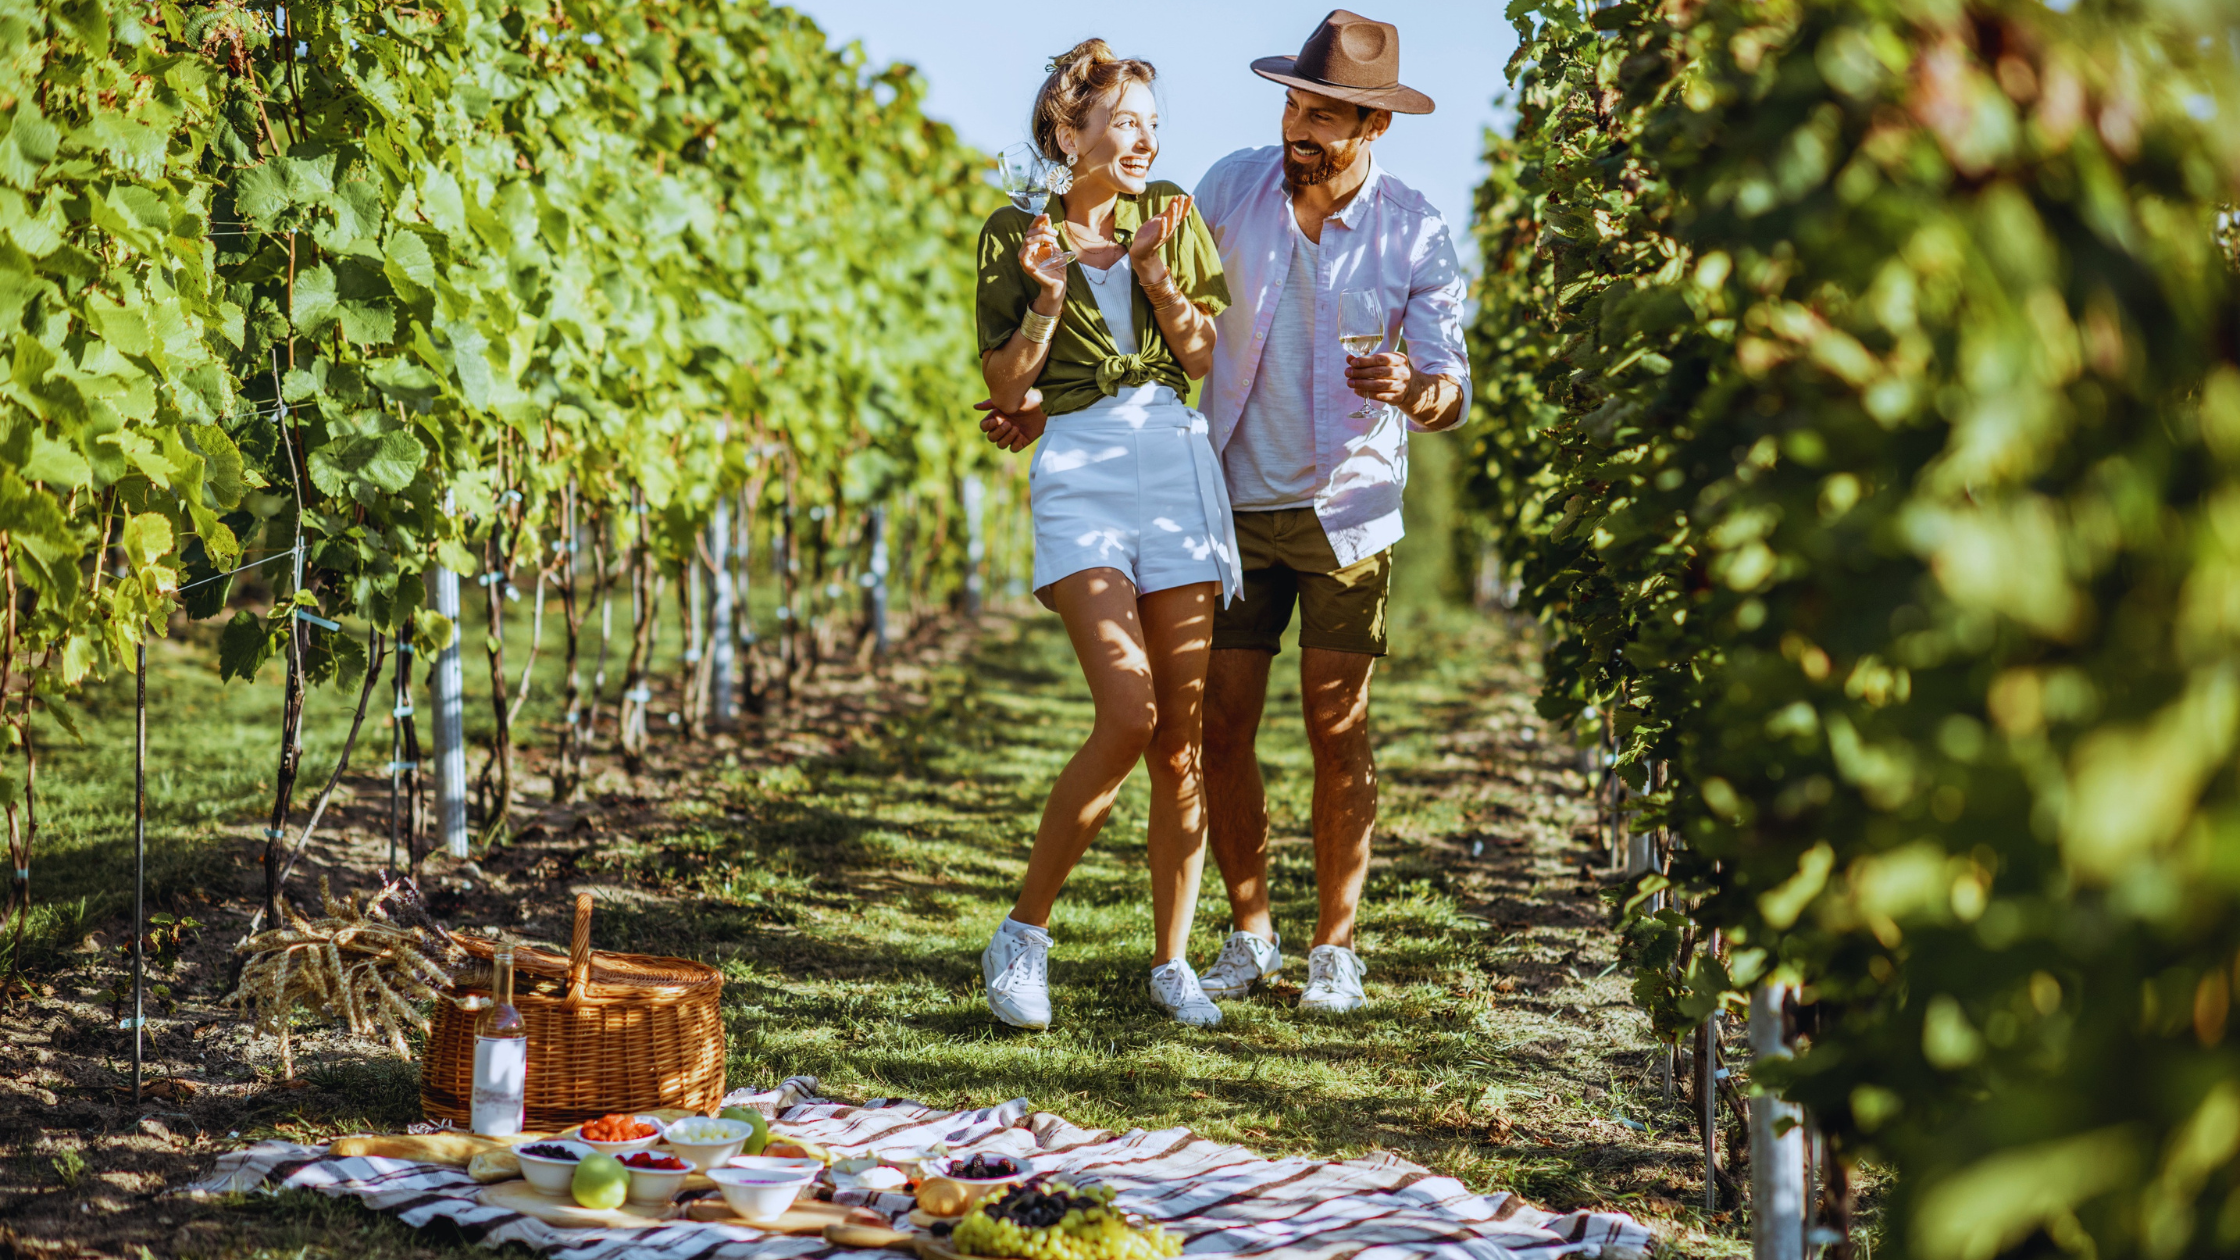 Enjoy a seasonal picnic prepared by the Salene's chef for a lovely day out in the Winelands.